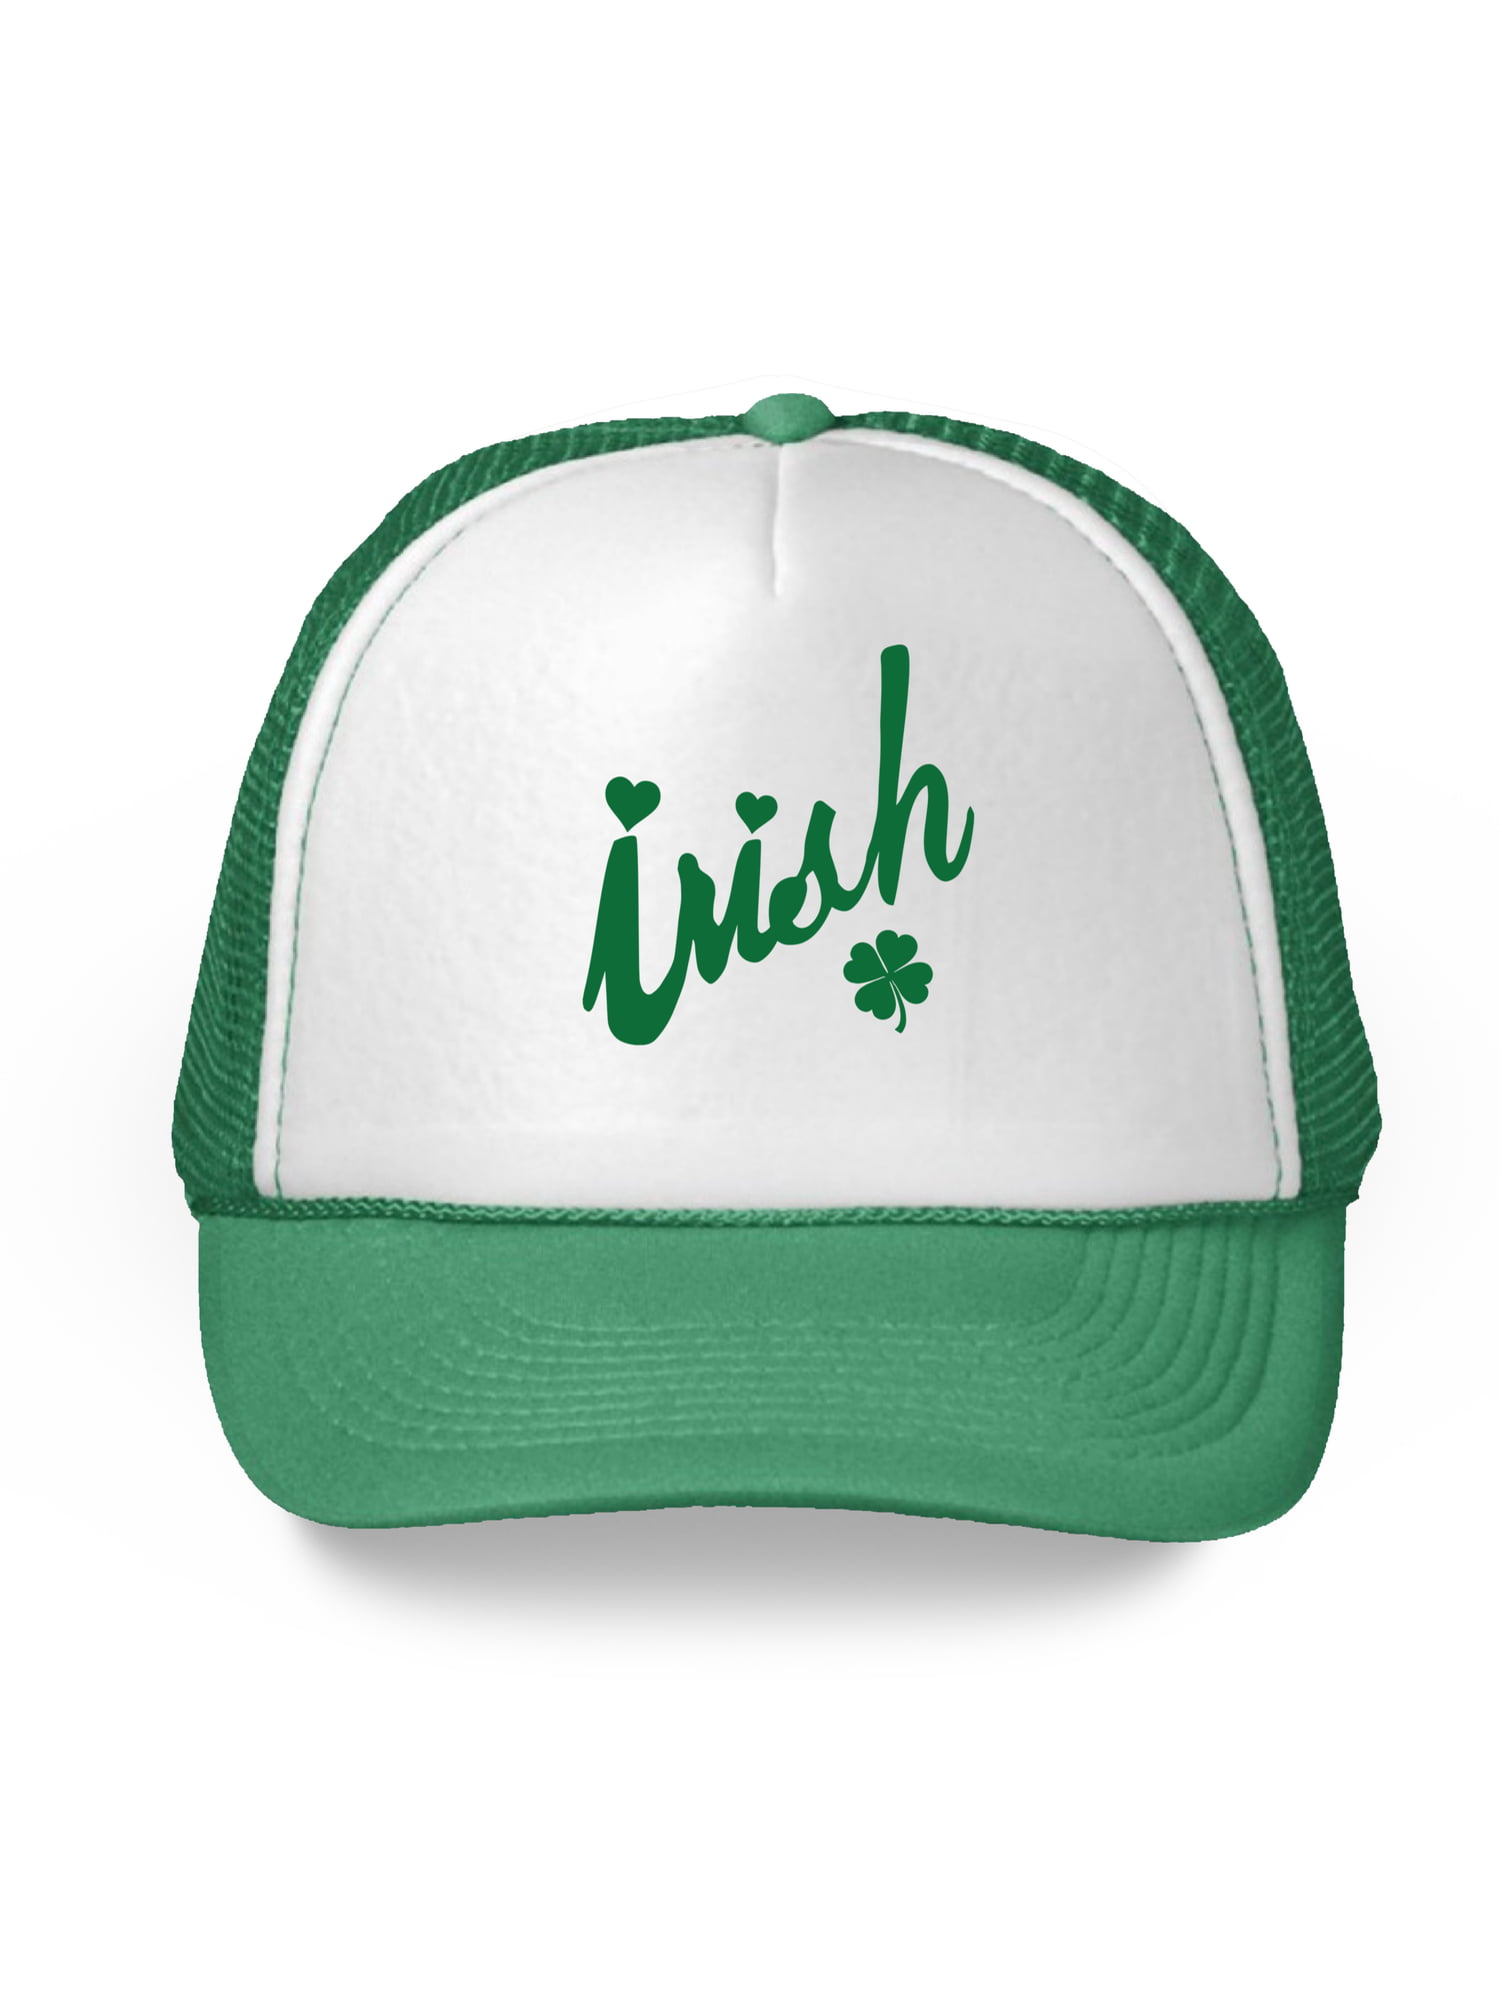 St Patricks Patty Irish Pride Four Leaf Clover Green Luck Relaxed Hat Cap Lucky